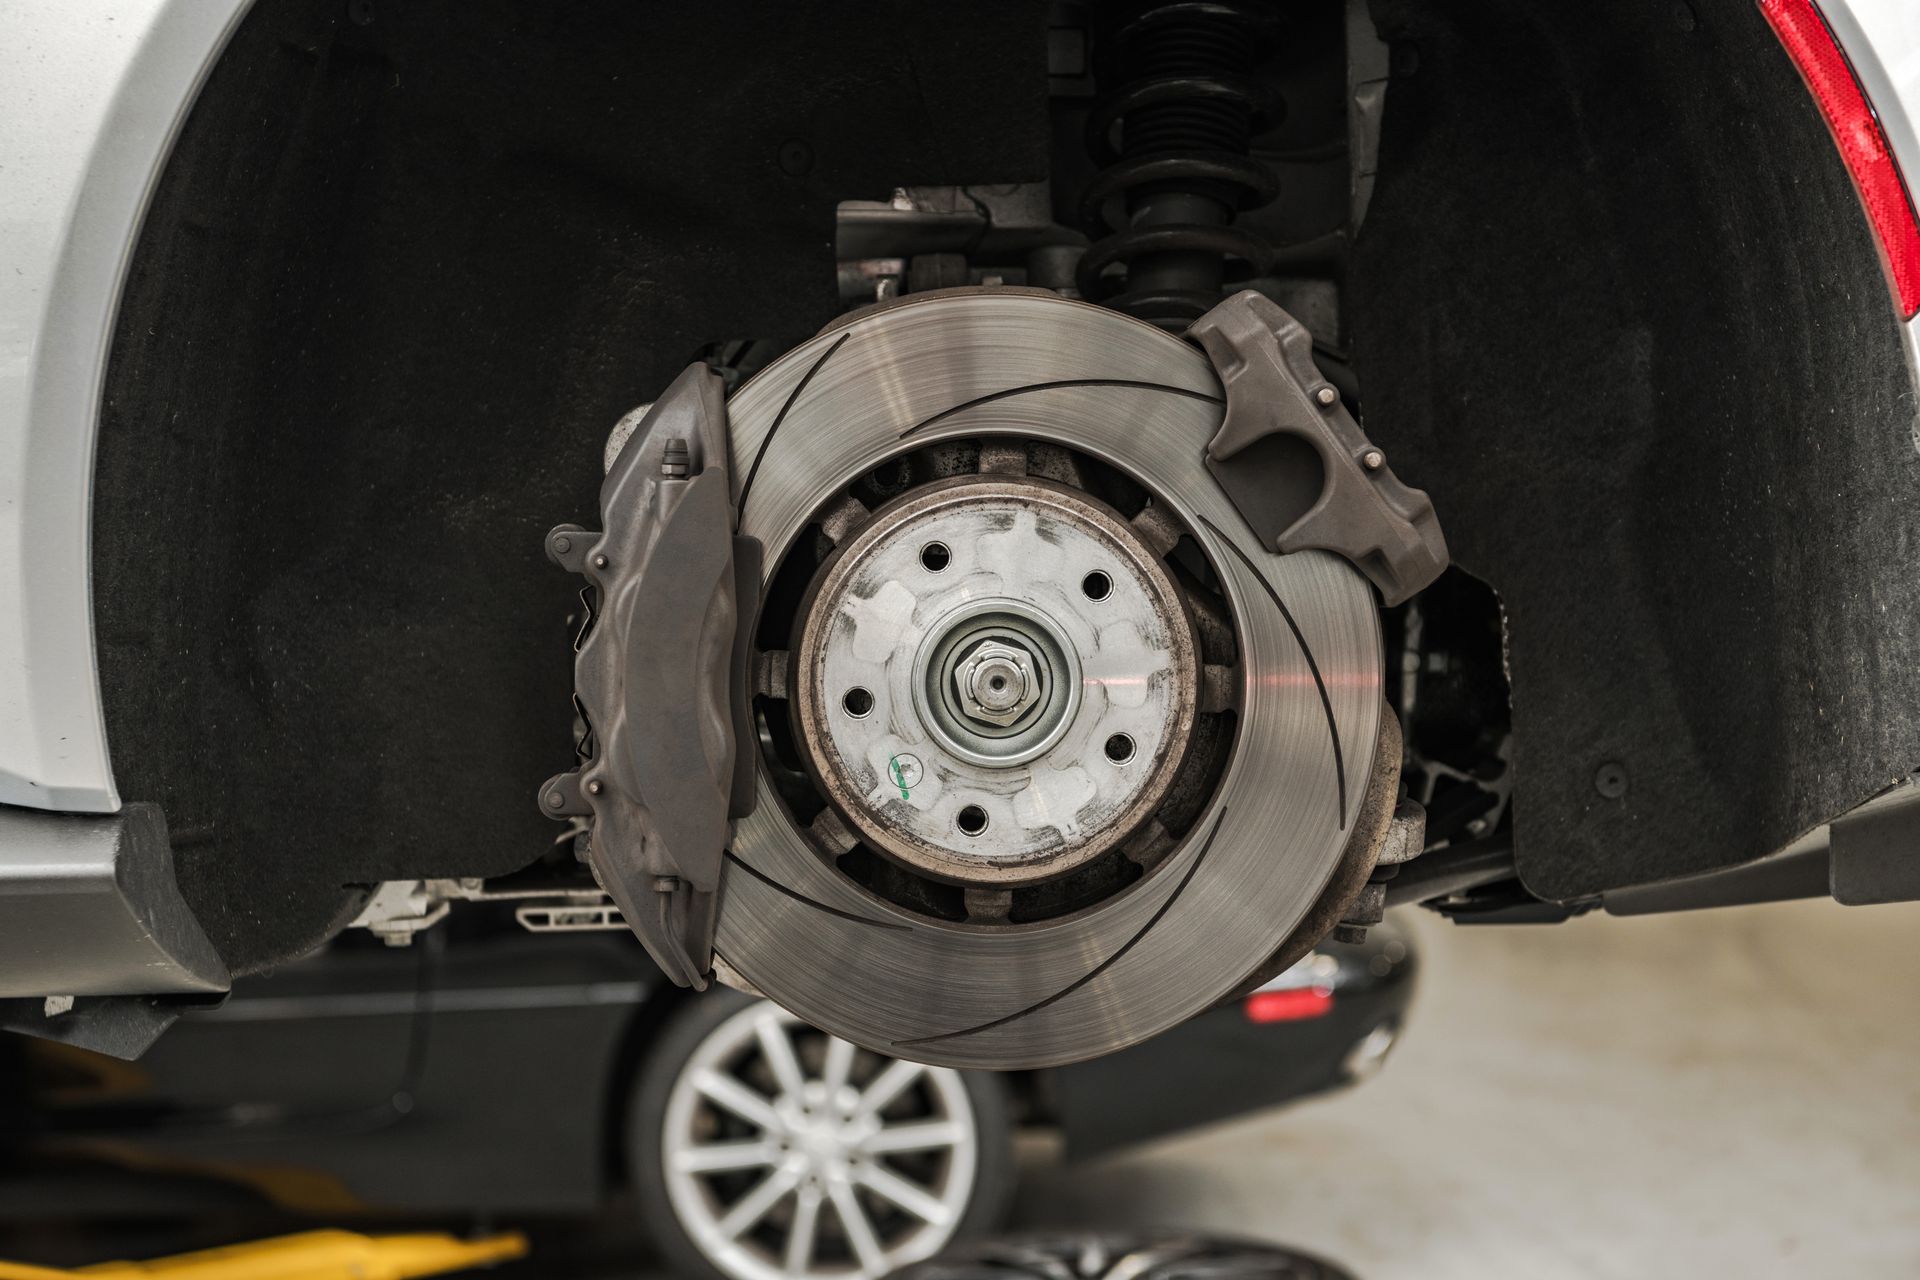 What Other Services Should I Pear With Brake Pad Replacement | Nationwide Car Care Centers
